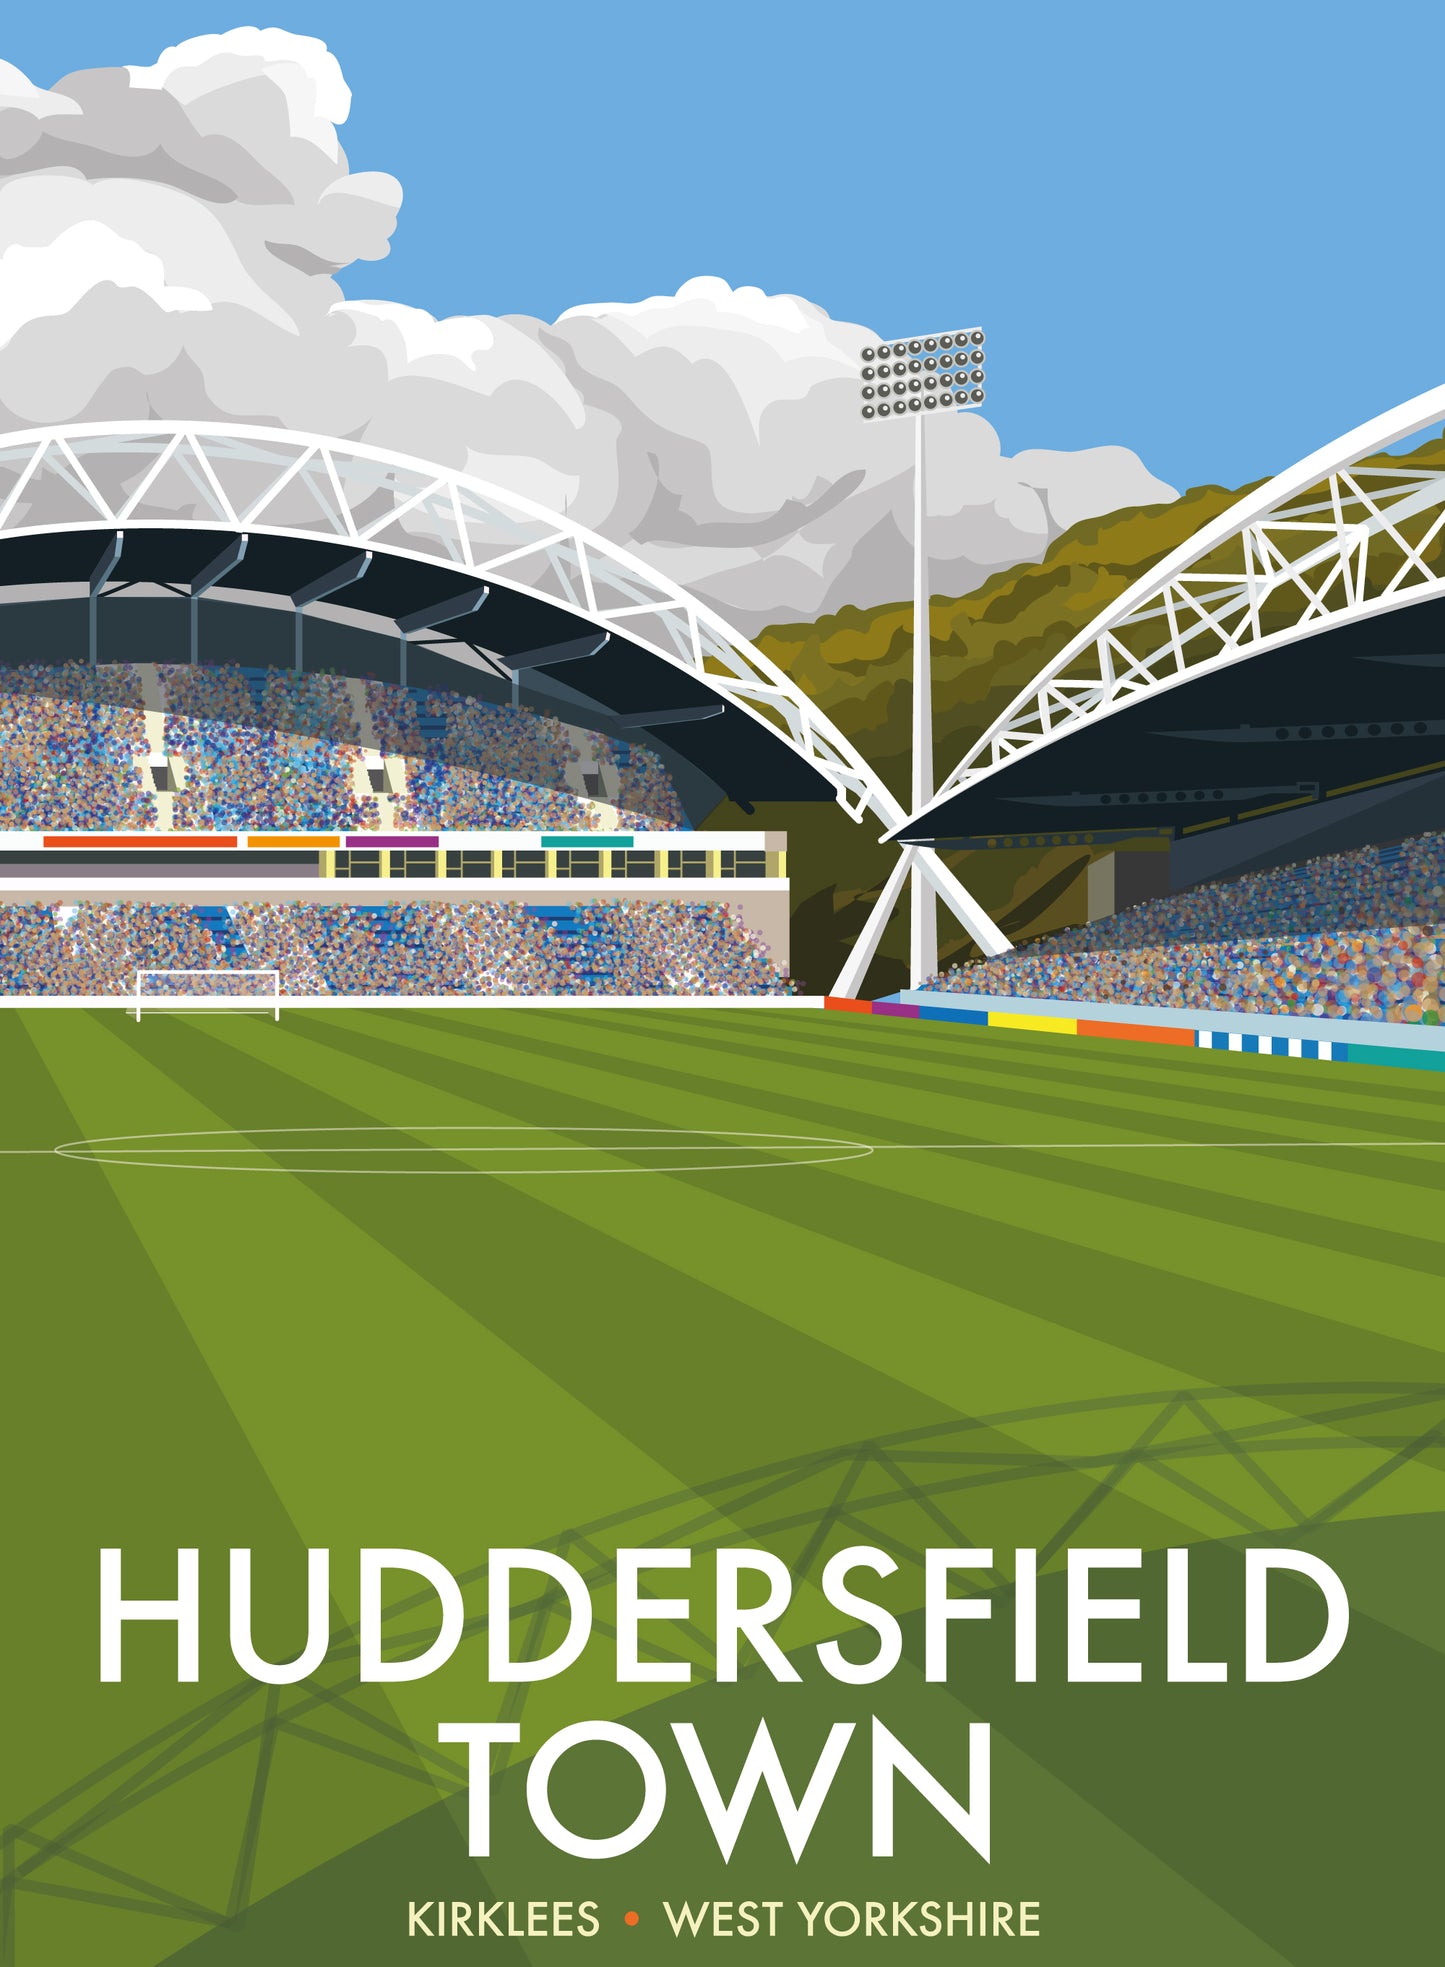 Huddersfield Town AFC Travel Poster